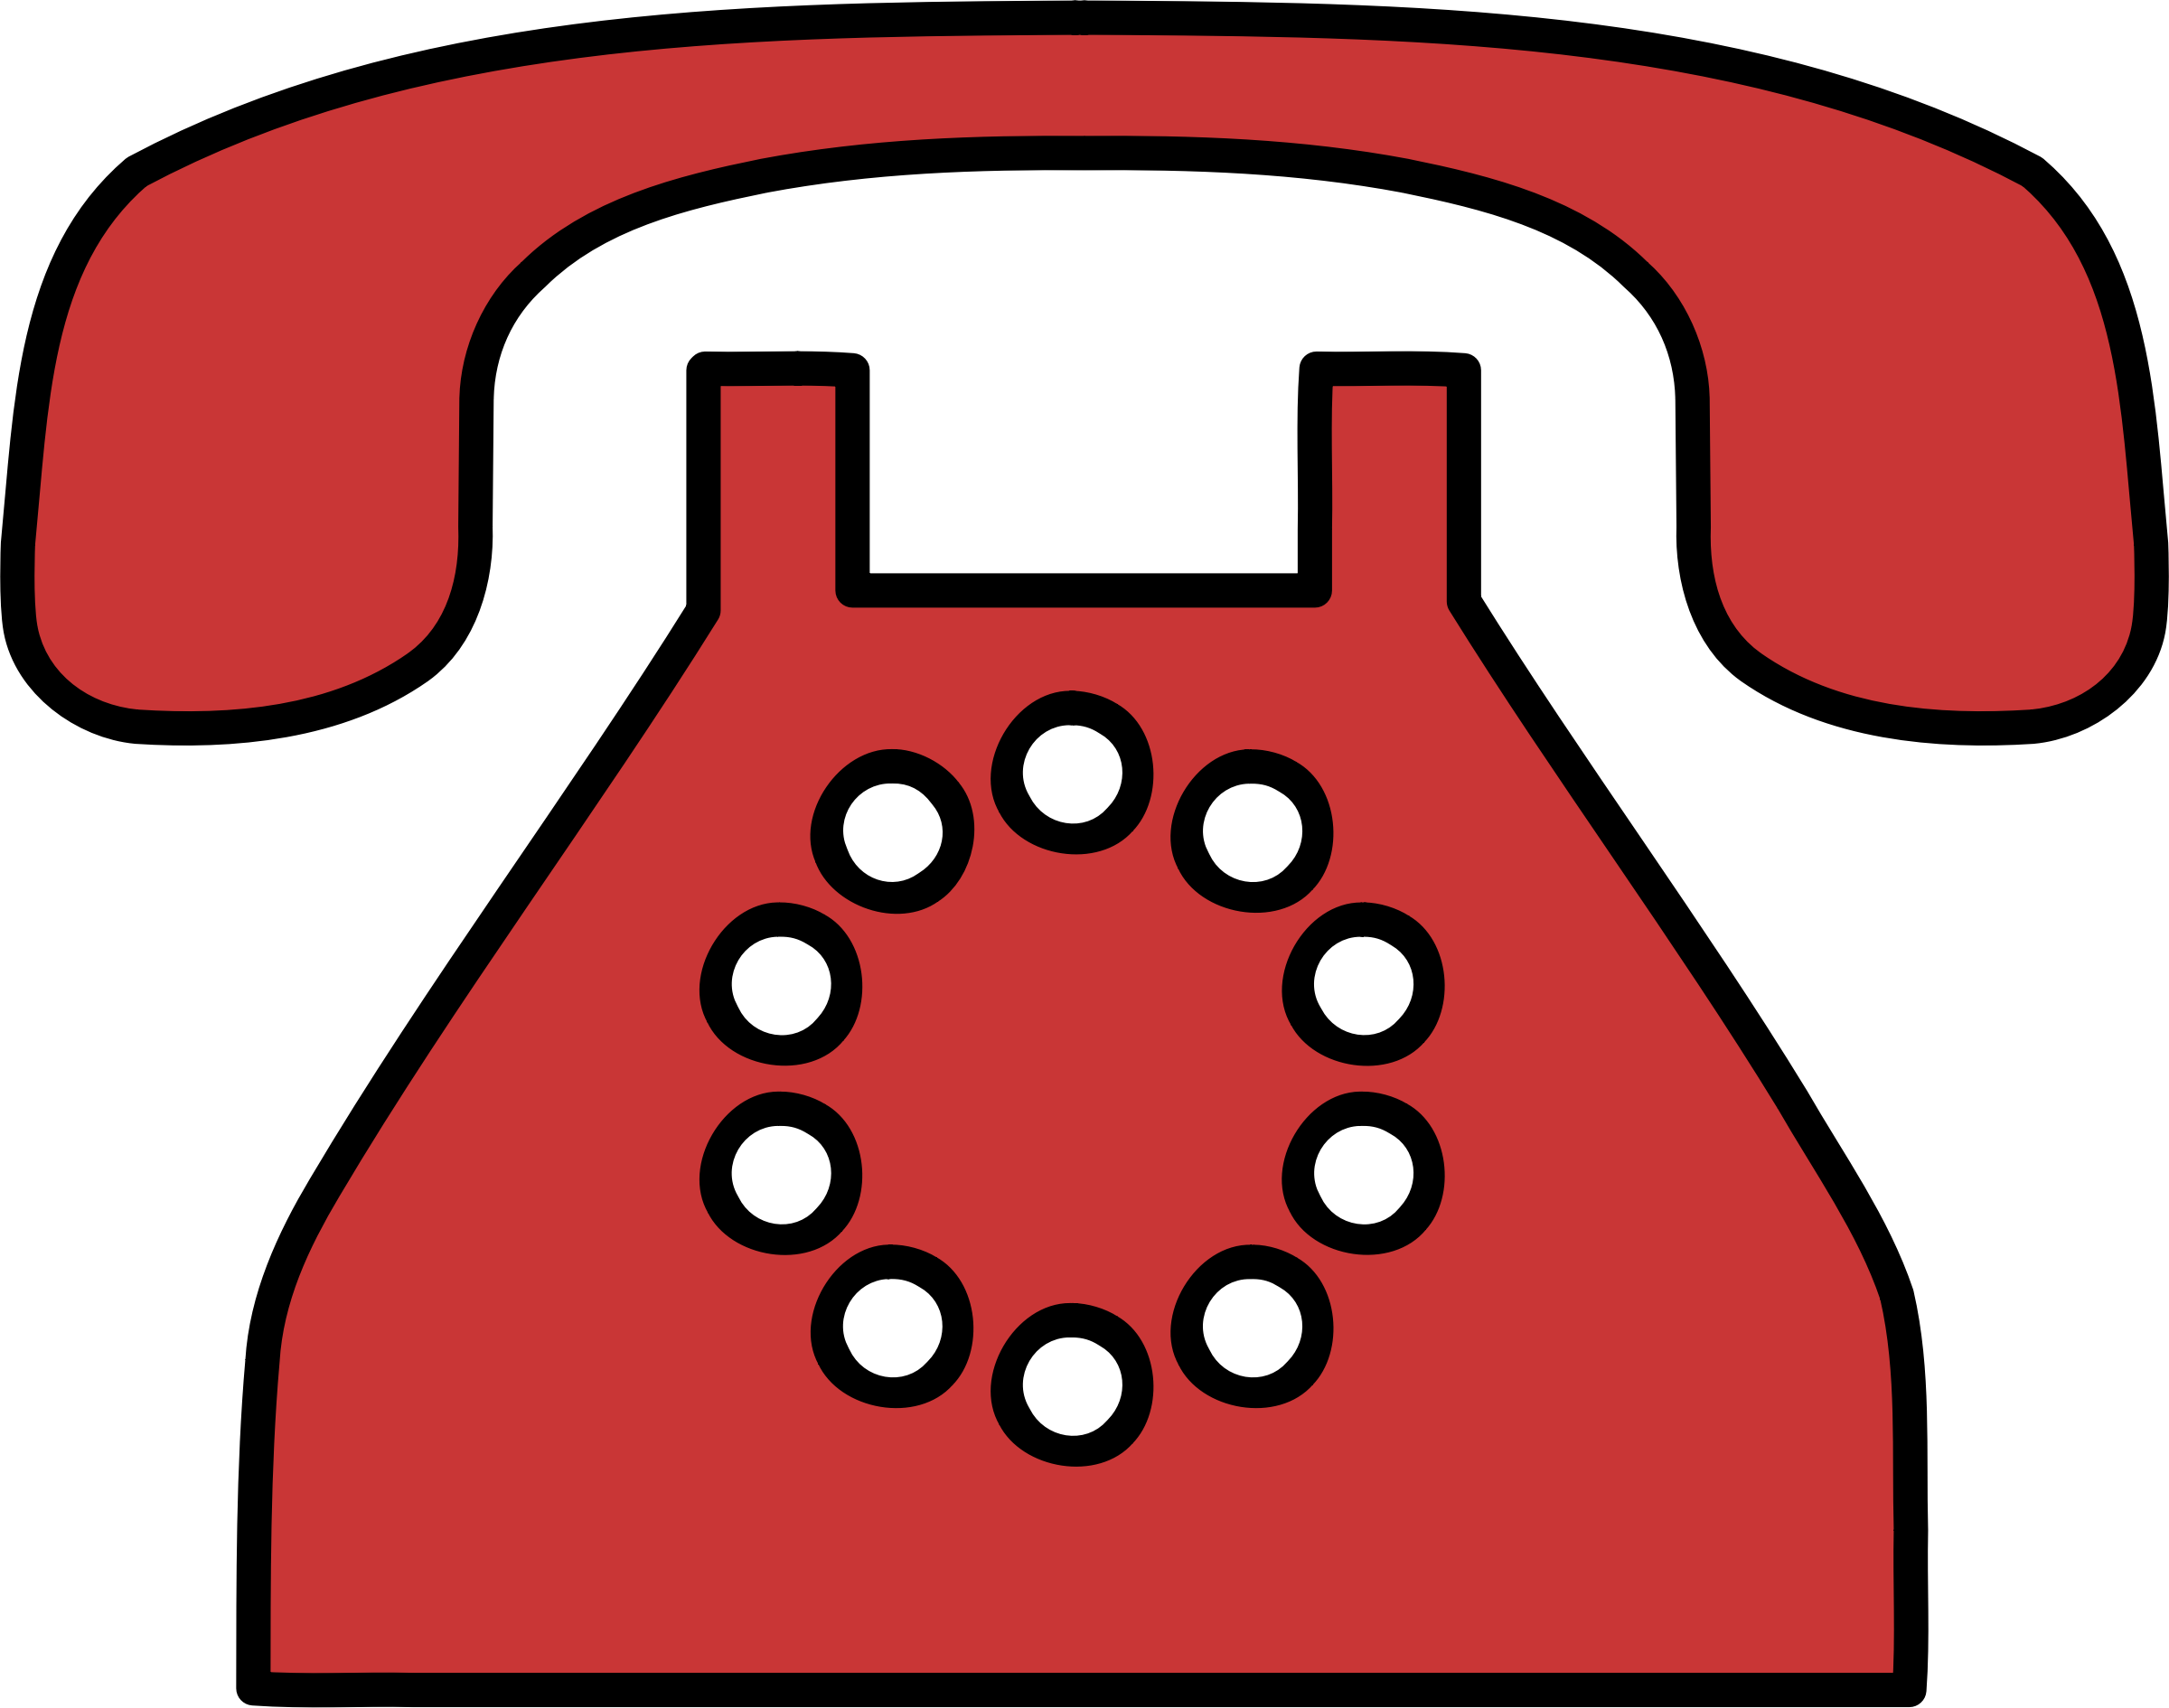 Phone big image png. Telephone clipart old fashioned telephone